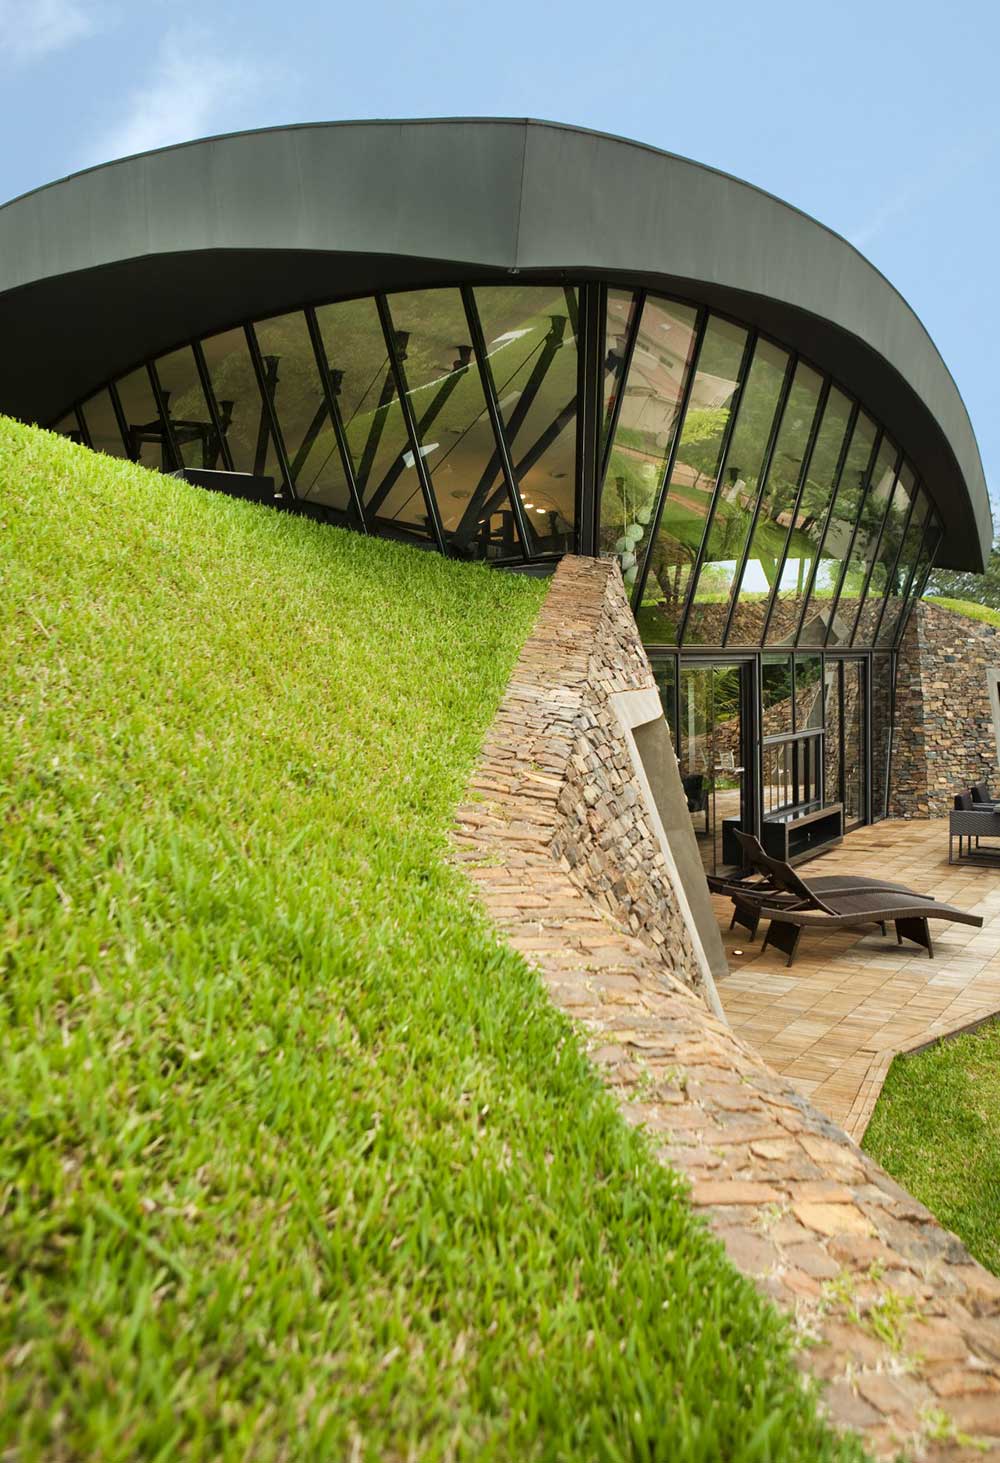 Two Homes in Luque, Paraguay, by Bauen